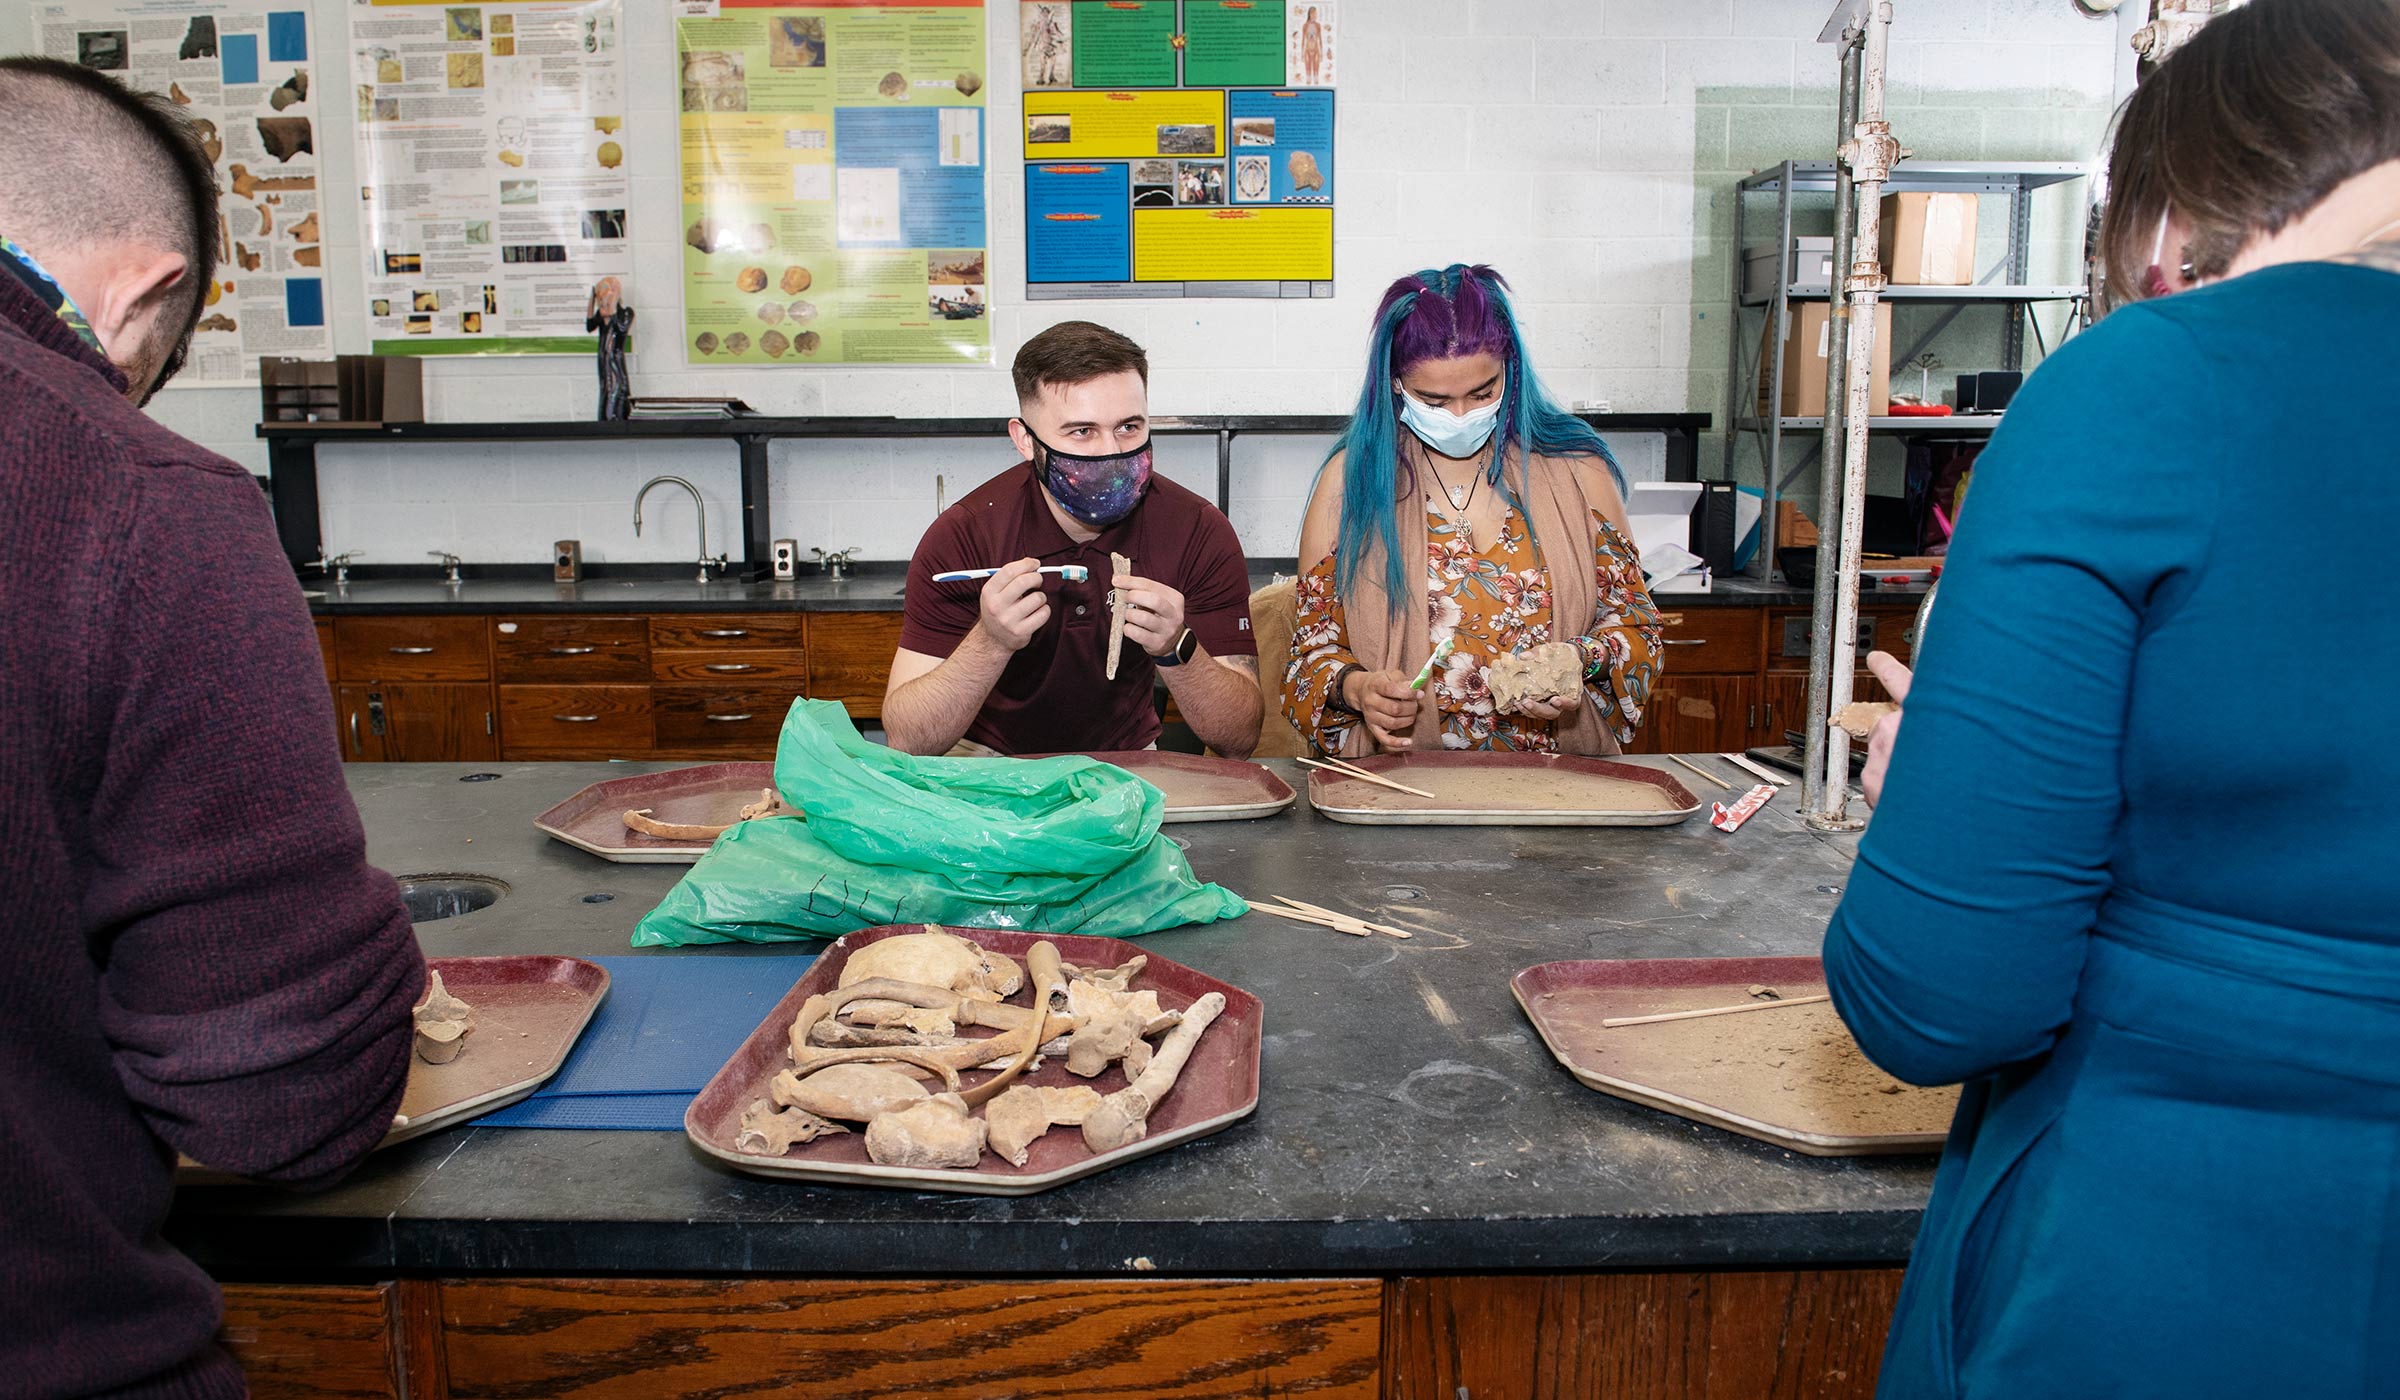 Students work in an Anthropology lab in Etheridge, cleaning a shipment of bones from Croatia, readying for education and research.